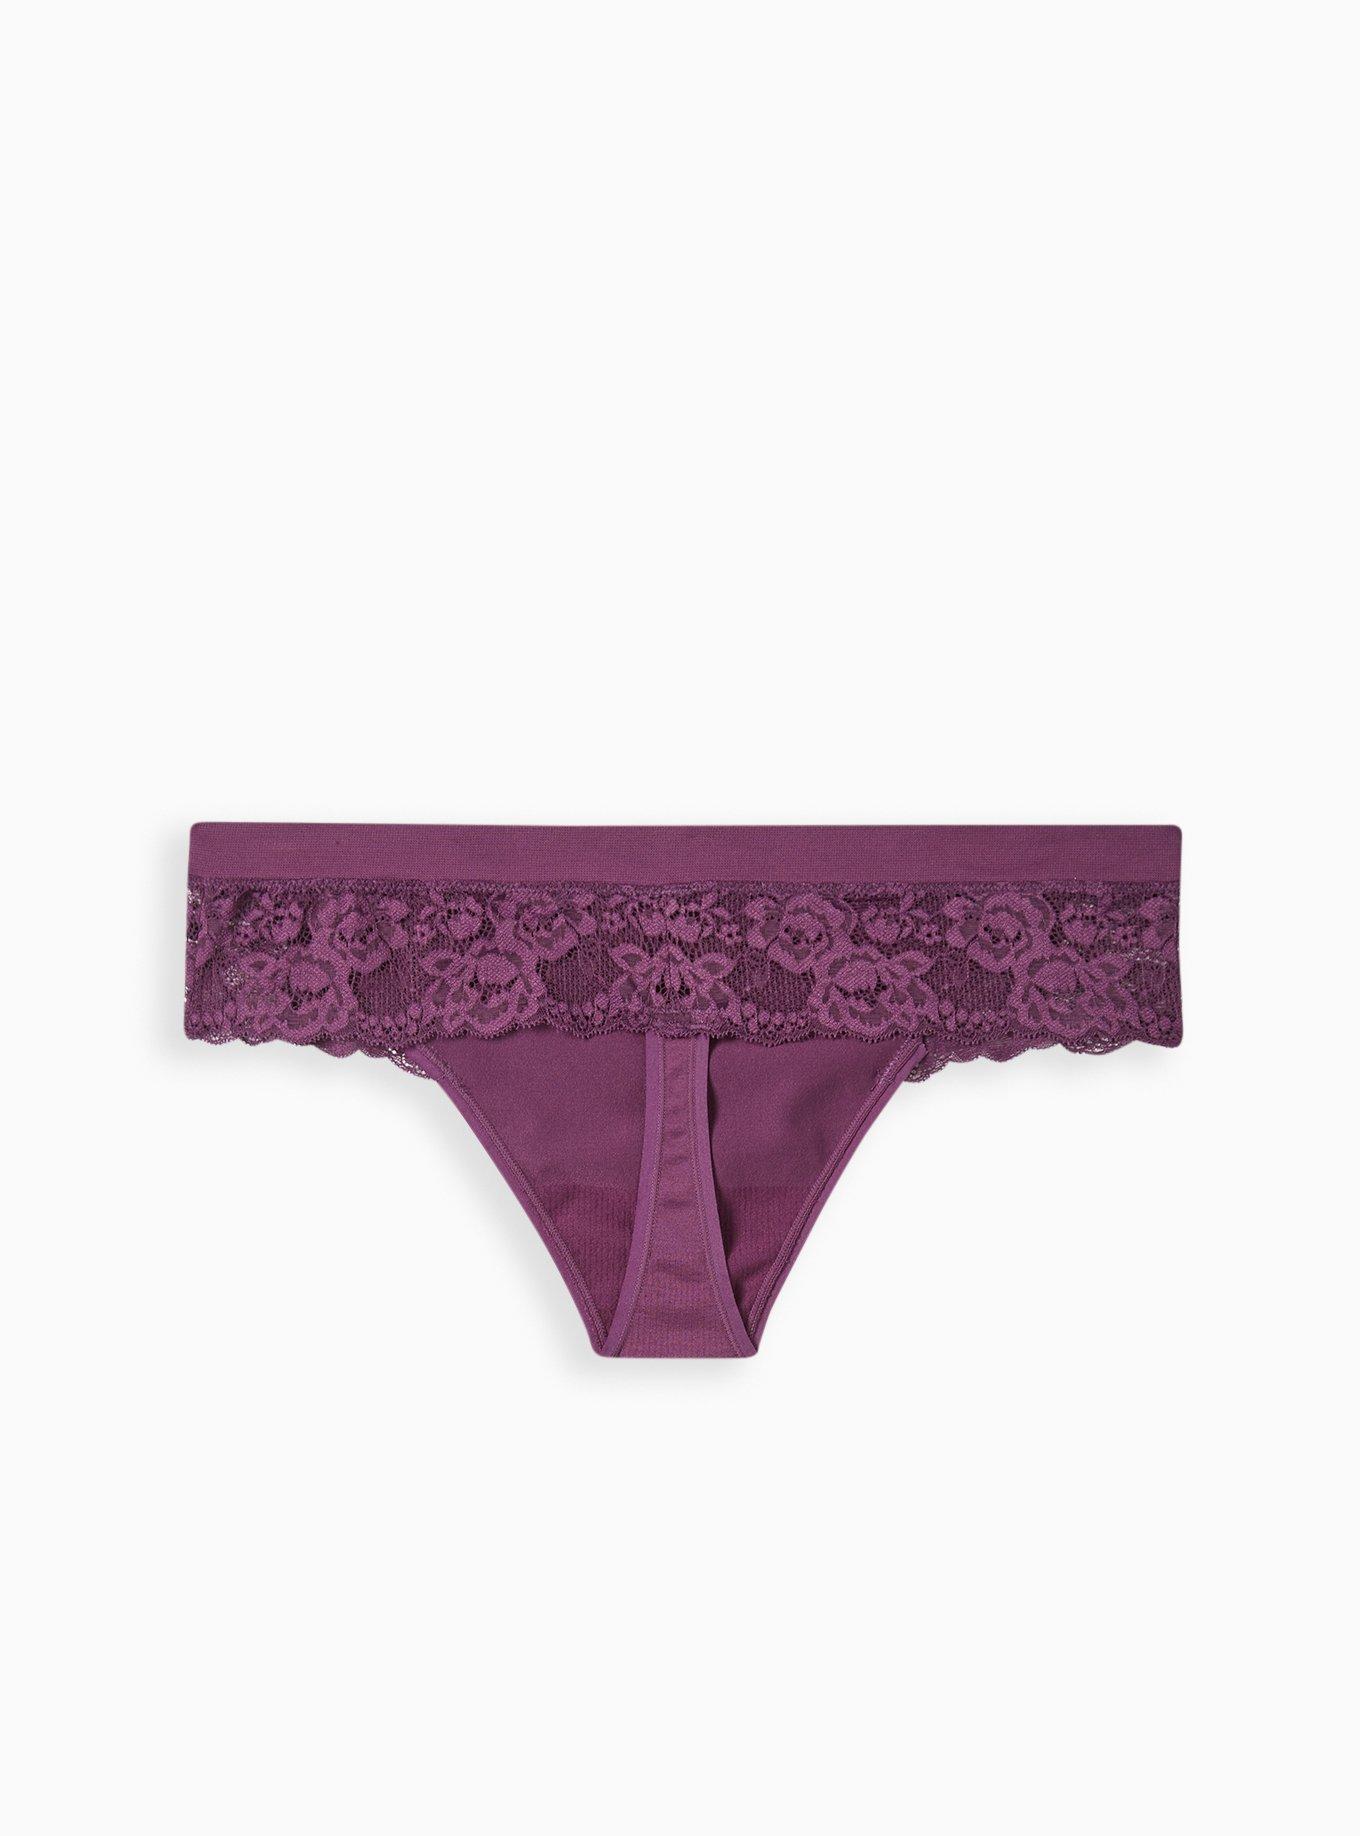 Victoria's Secret Burgundy Purple Smooth No Show Hipster Knickers